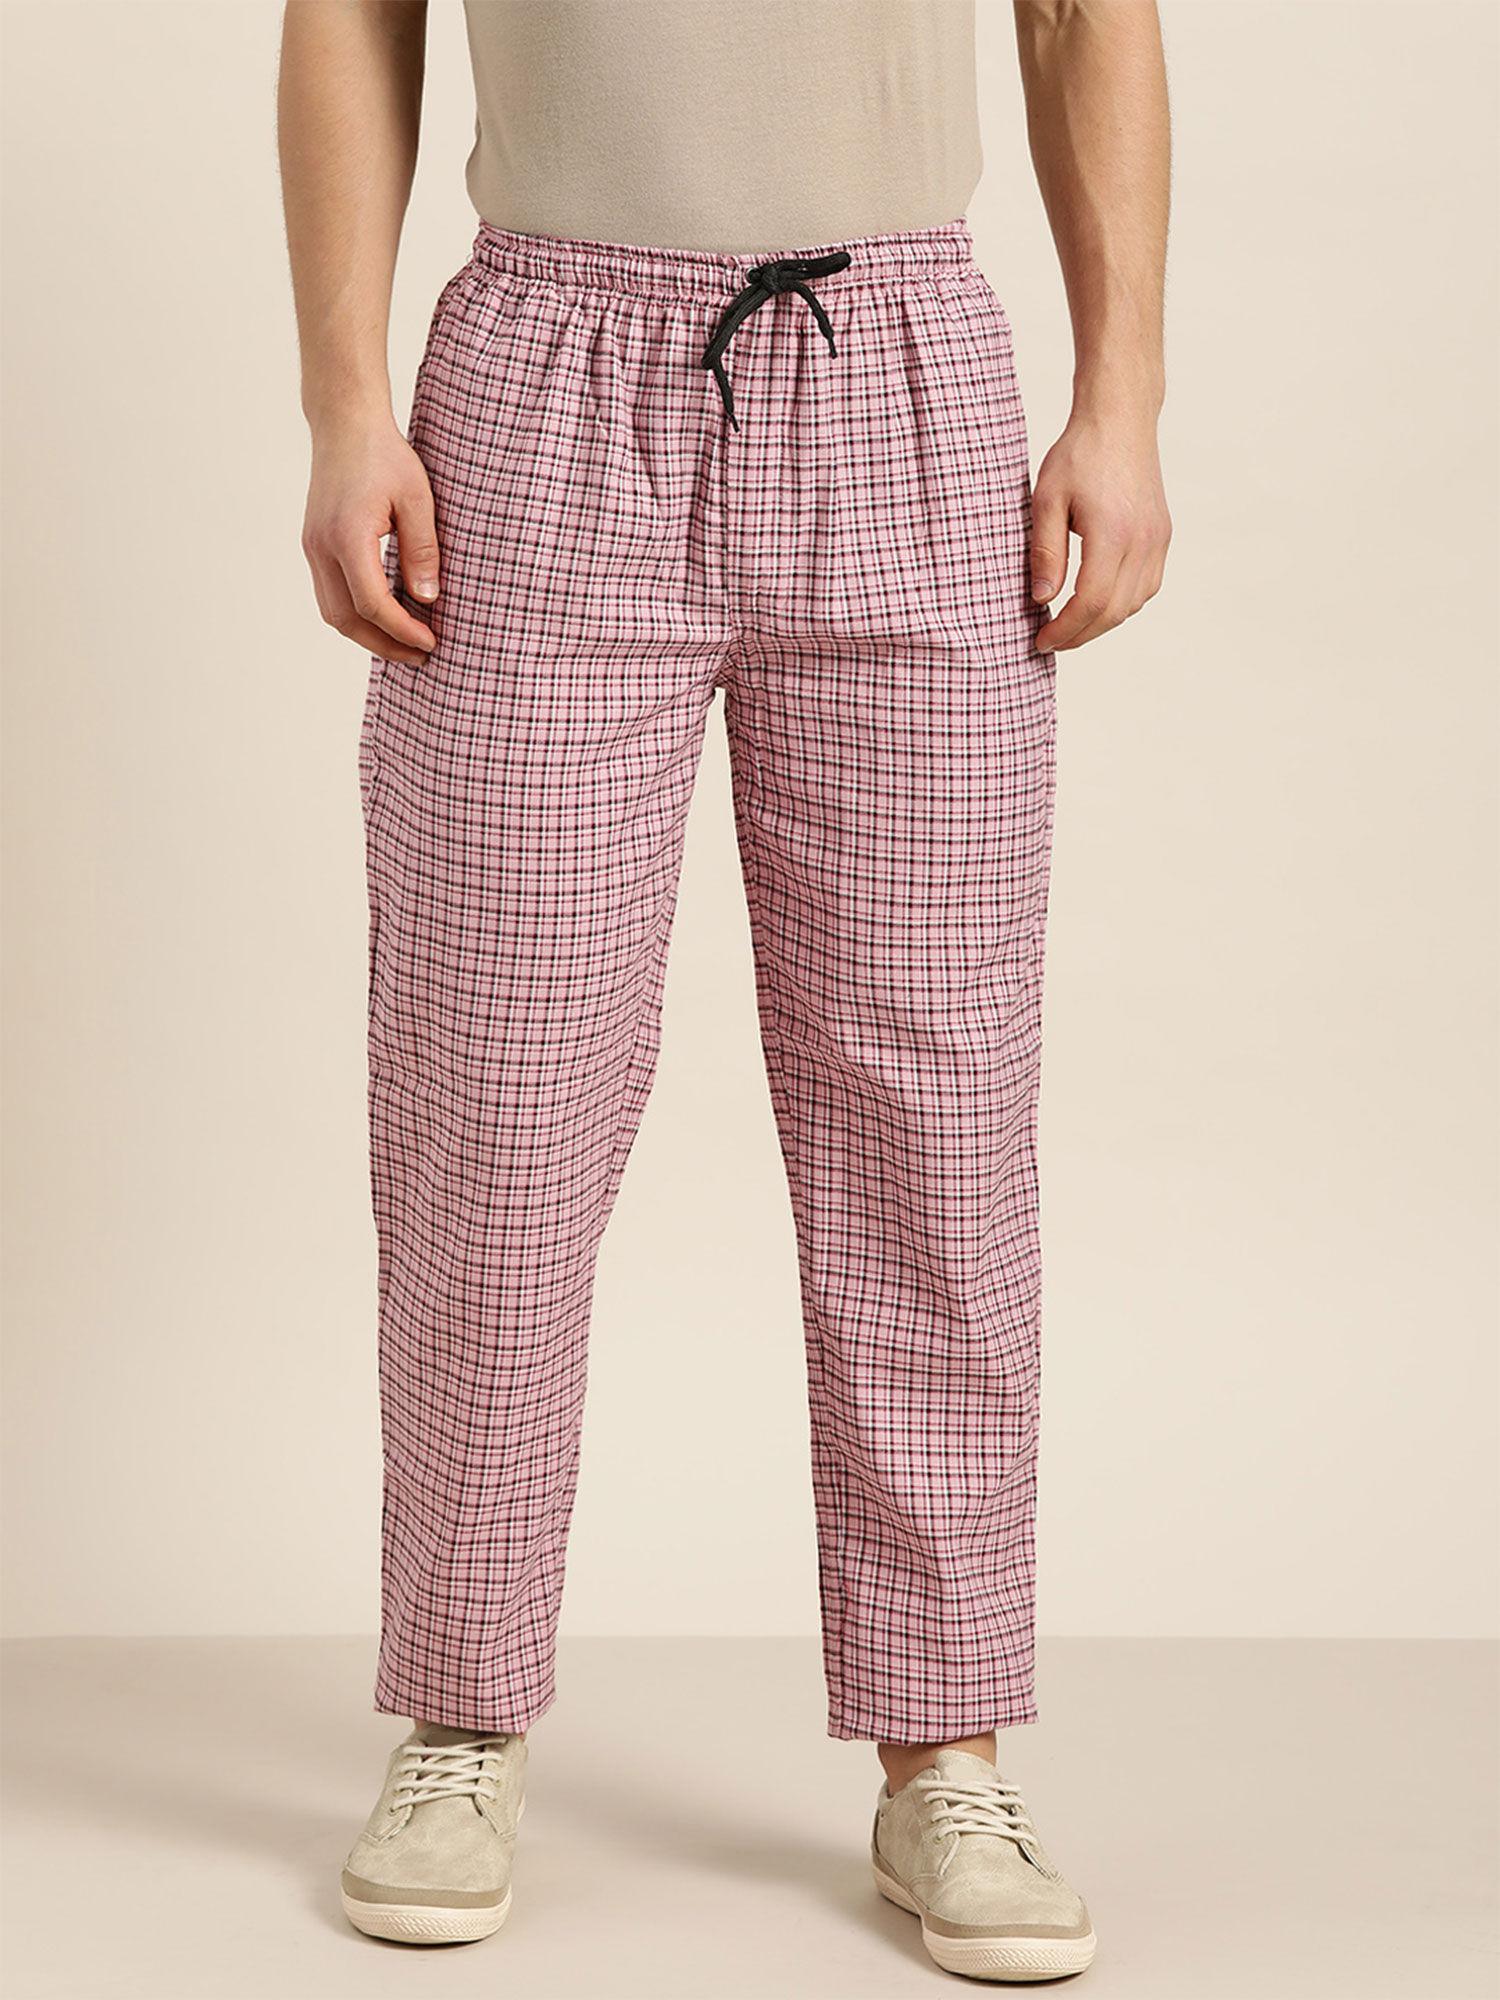 cotton pink & white checked track pant